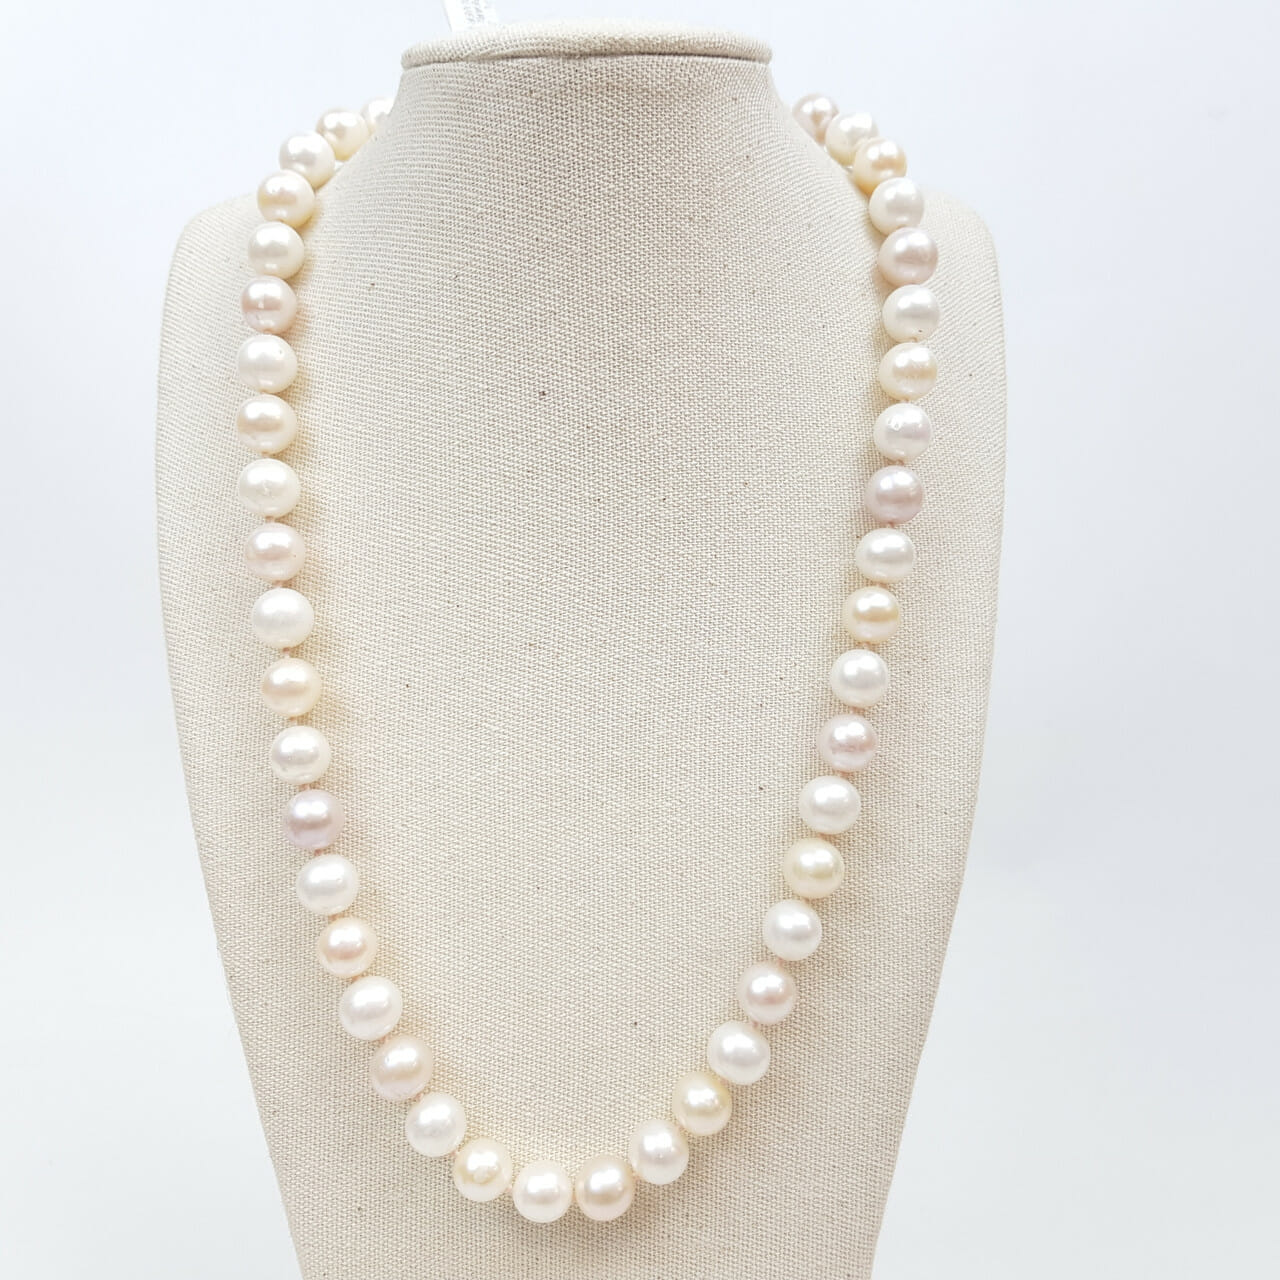 FRESHWATER PEARL NECKLACE WITH SILVER CLASP #39674